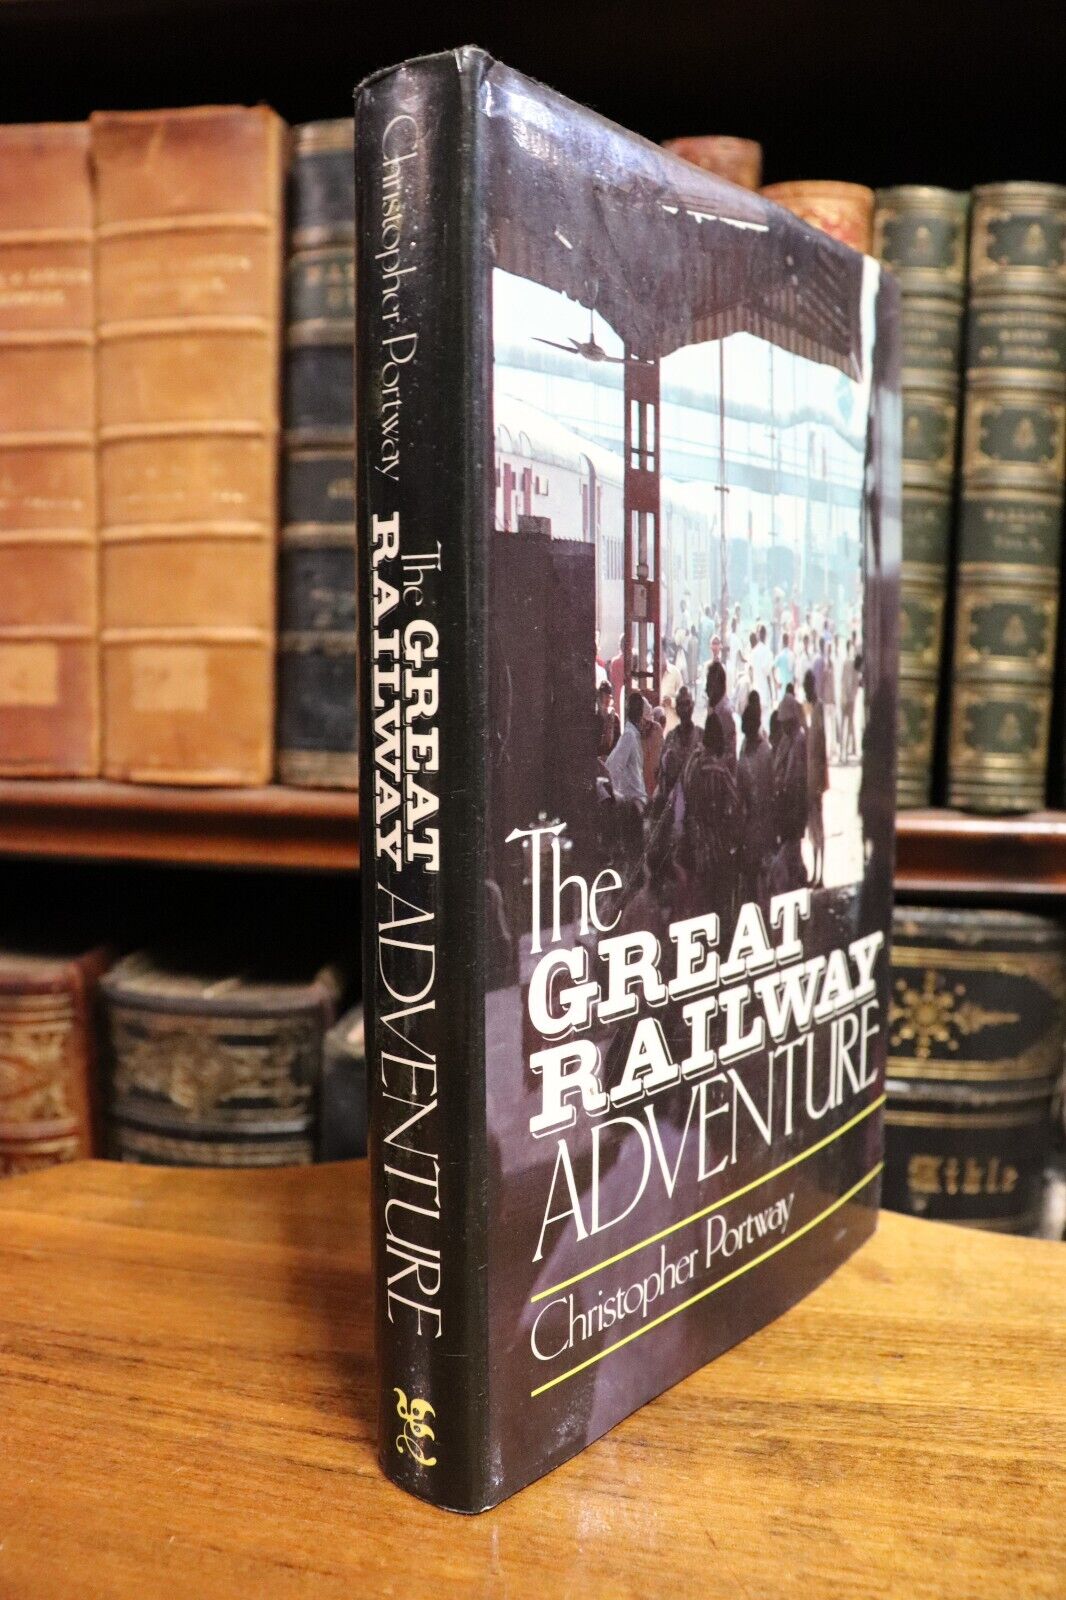 The Great Railway Adventure by  C Portway - 1983 - 1st Edition Railway Book